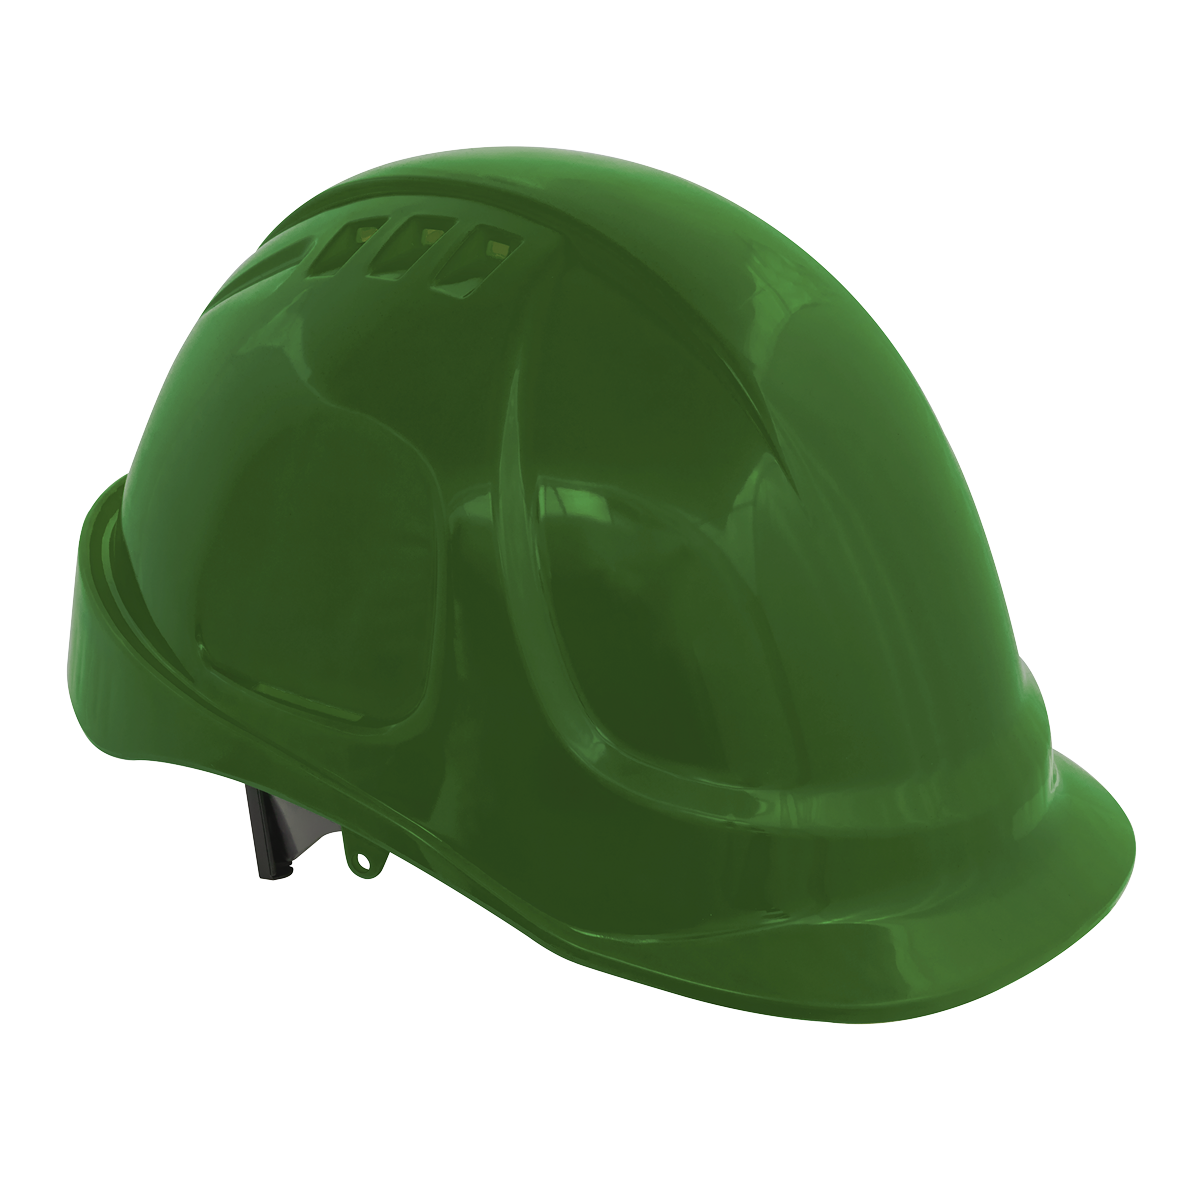 Sealey Safety Helmet - Vented (Green) 502G